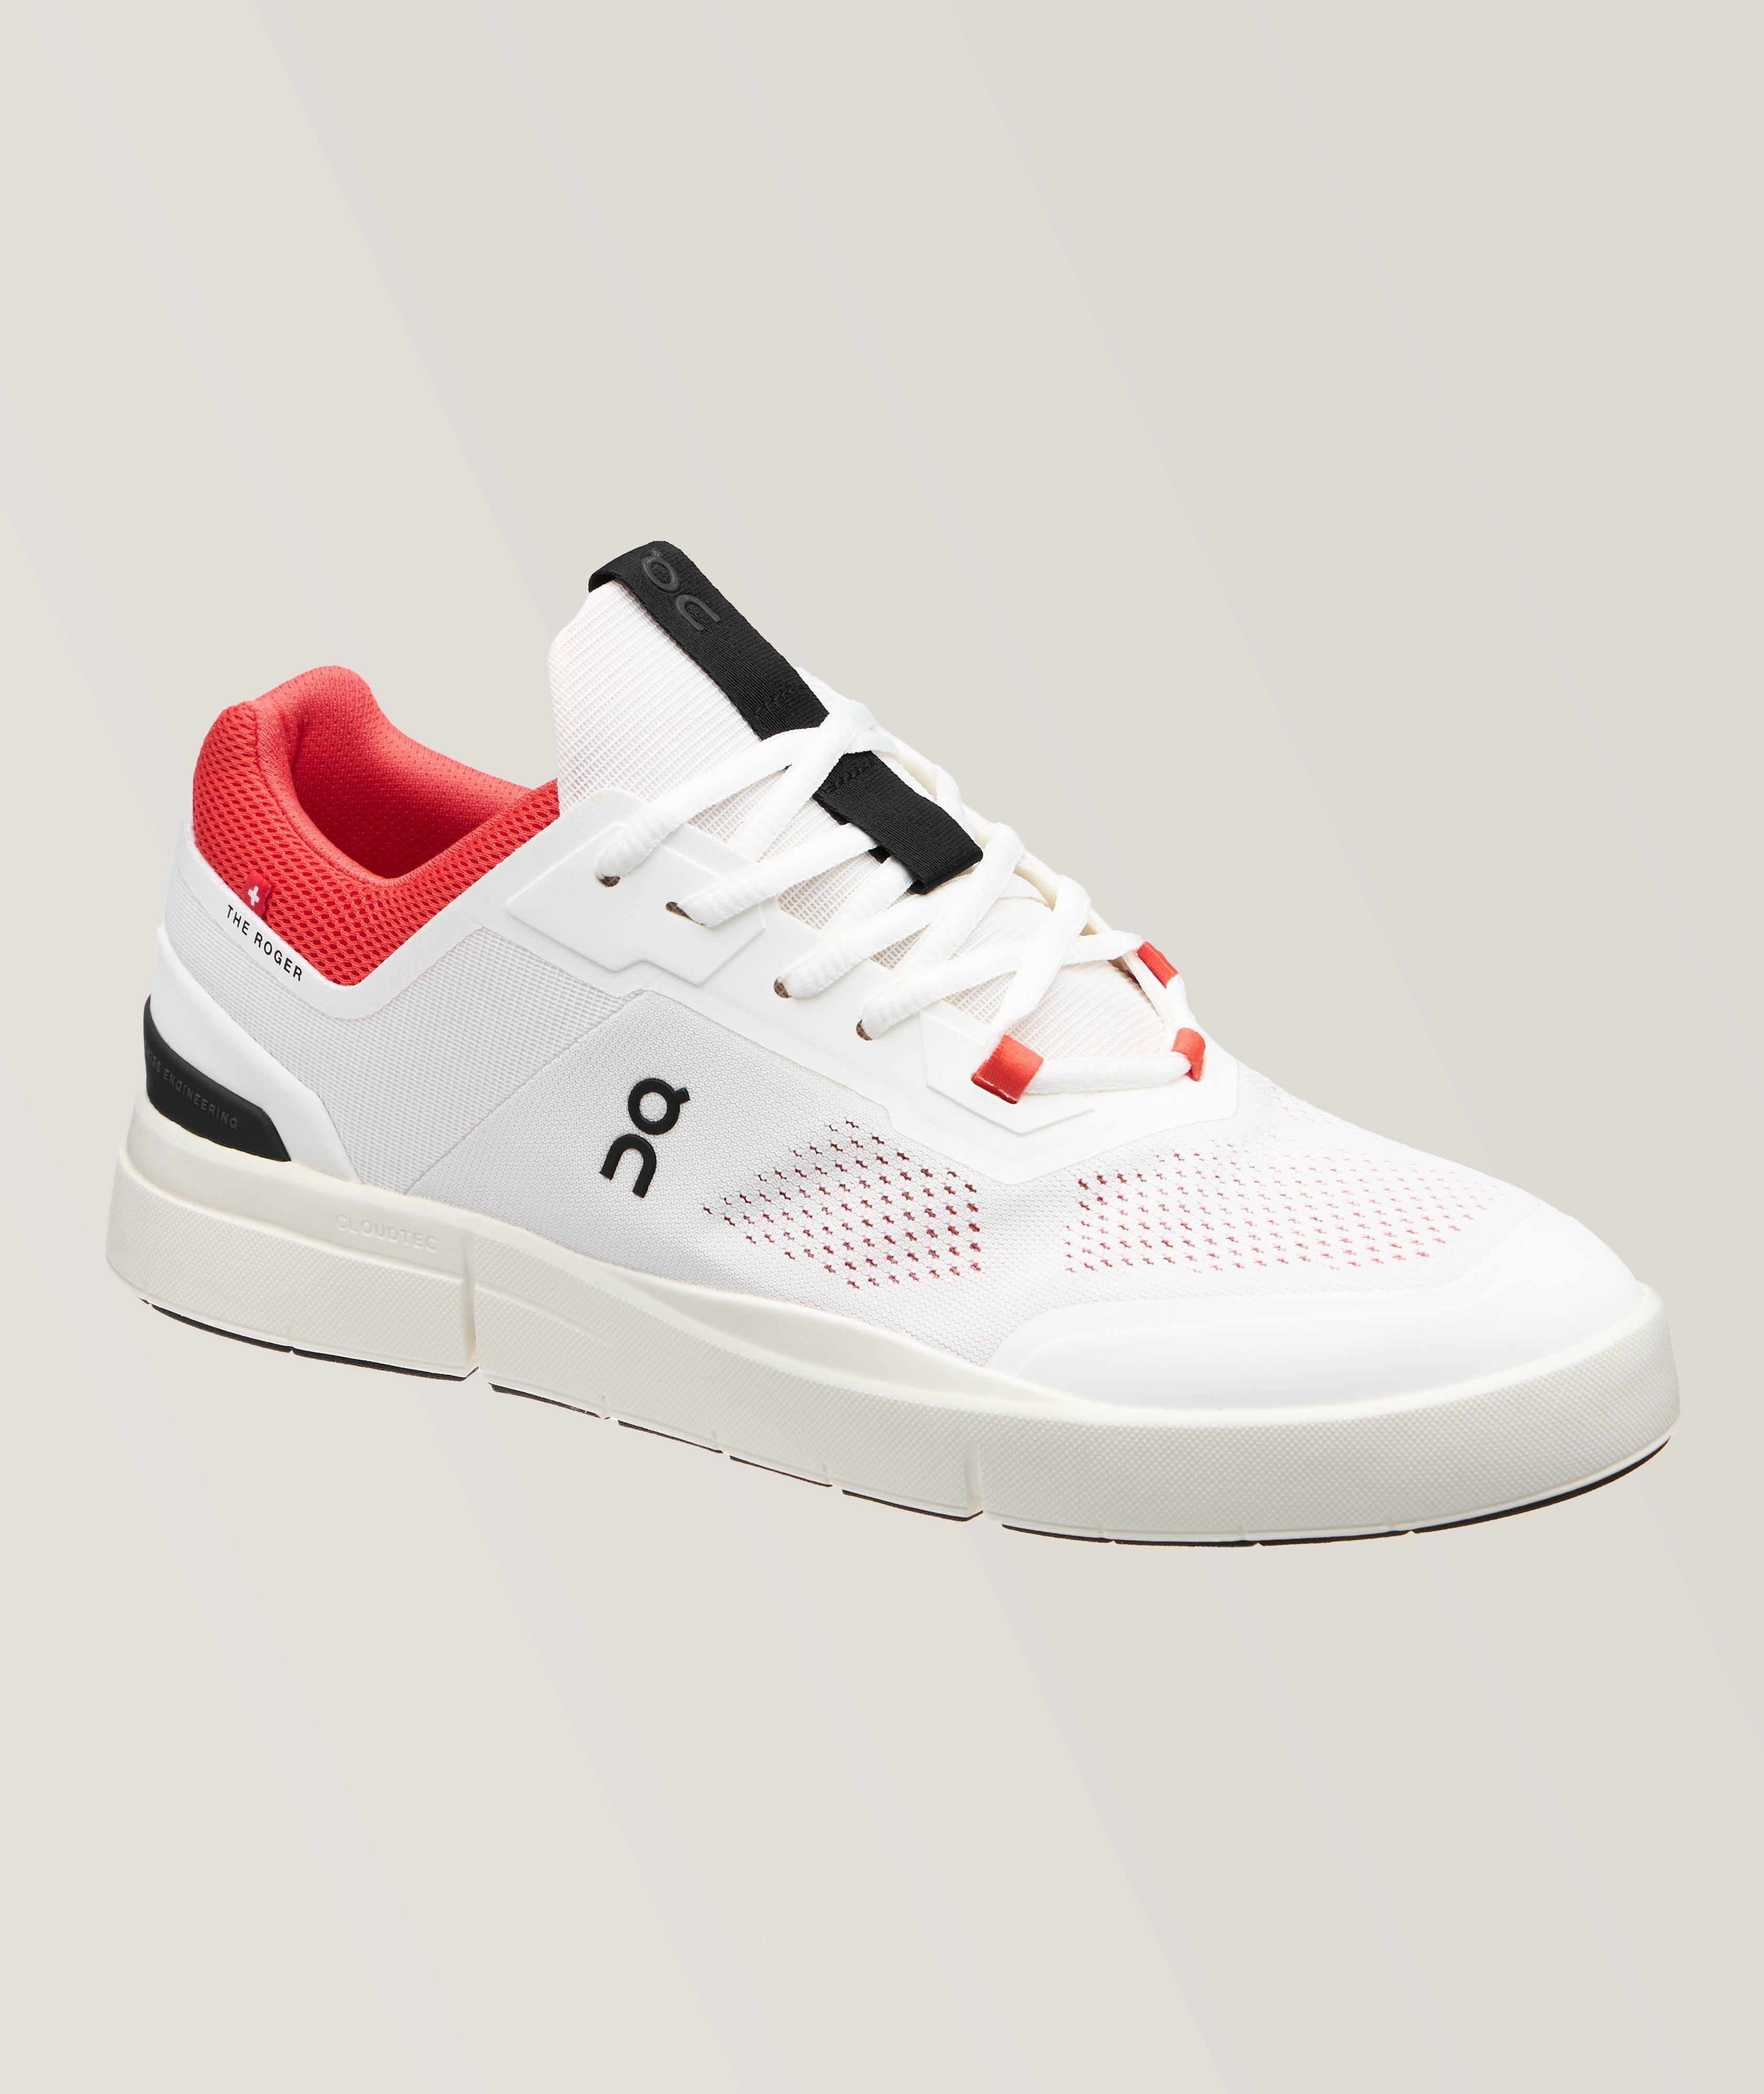 Chaussure sport The Roger Spin en tricot image 0